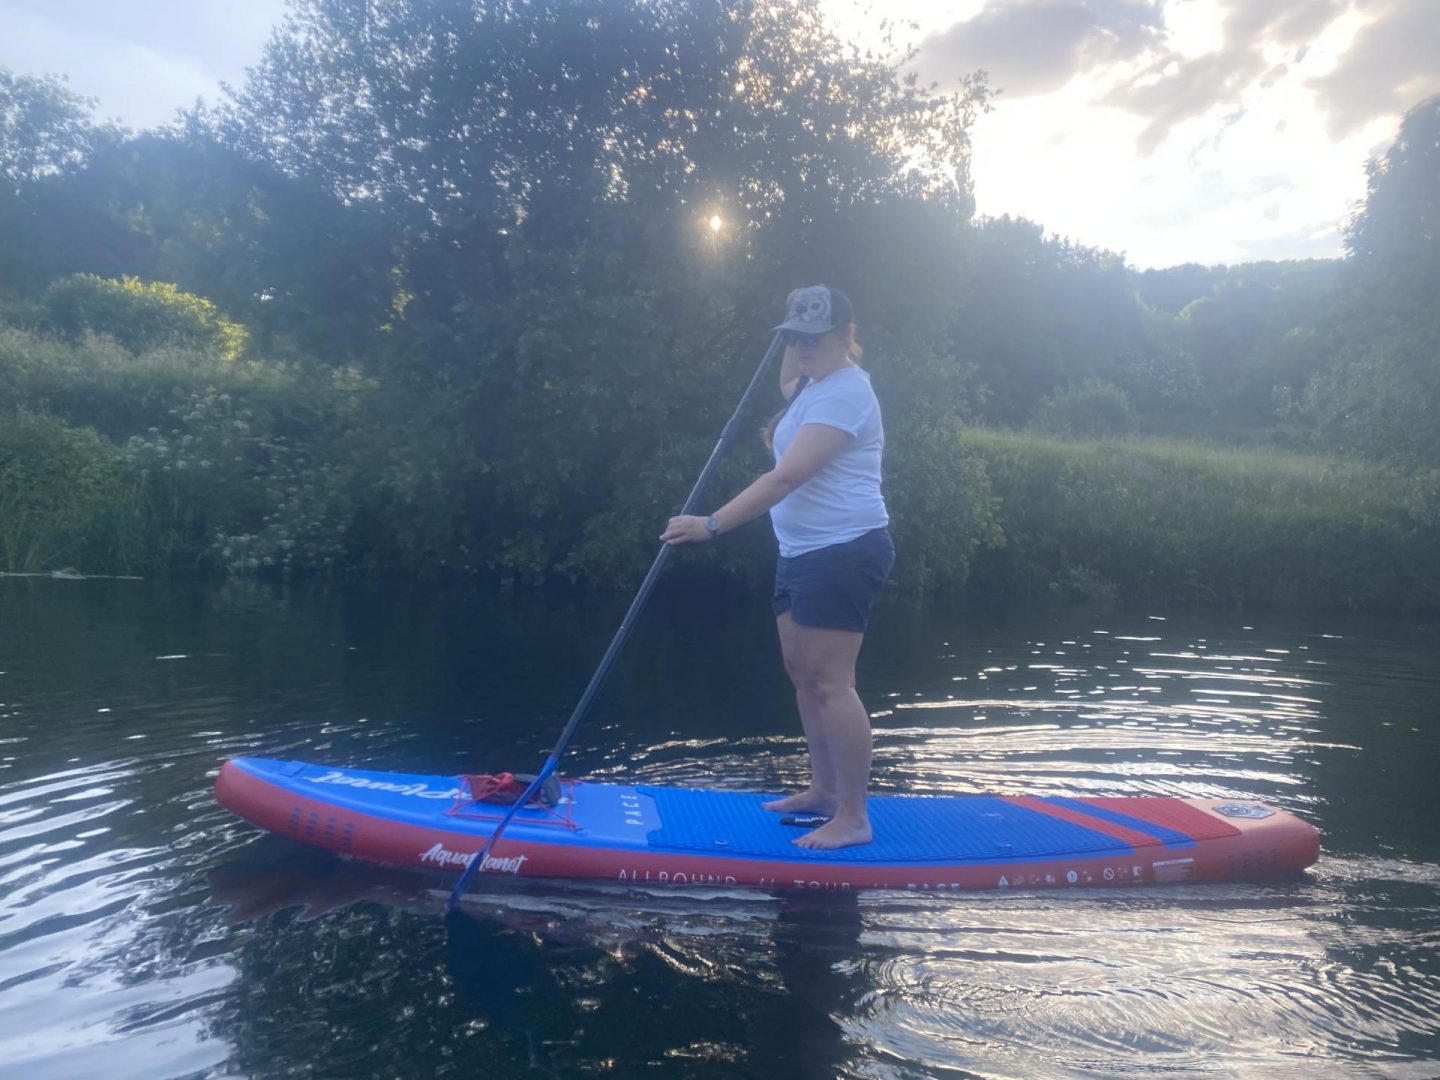  Aquaplanet PACE SUP stand-up paddleboard review